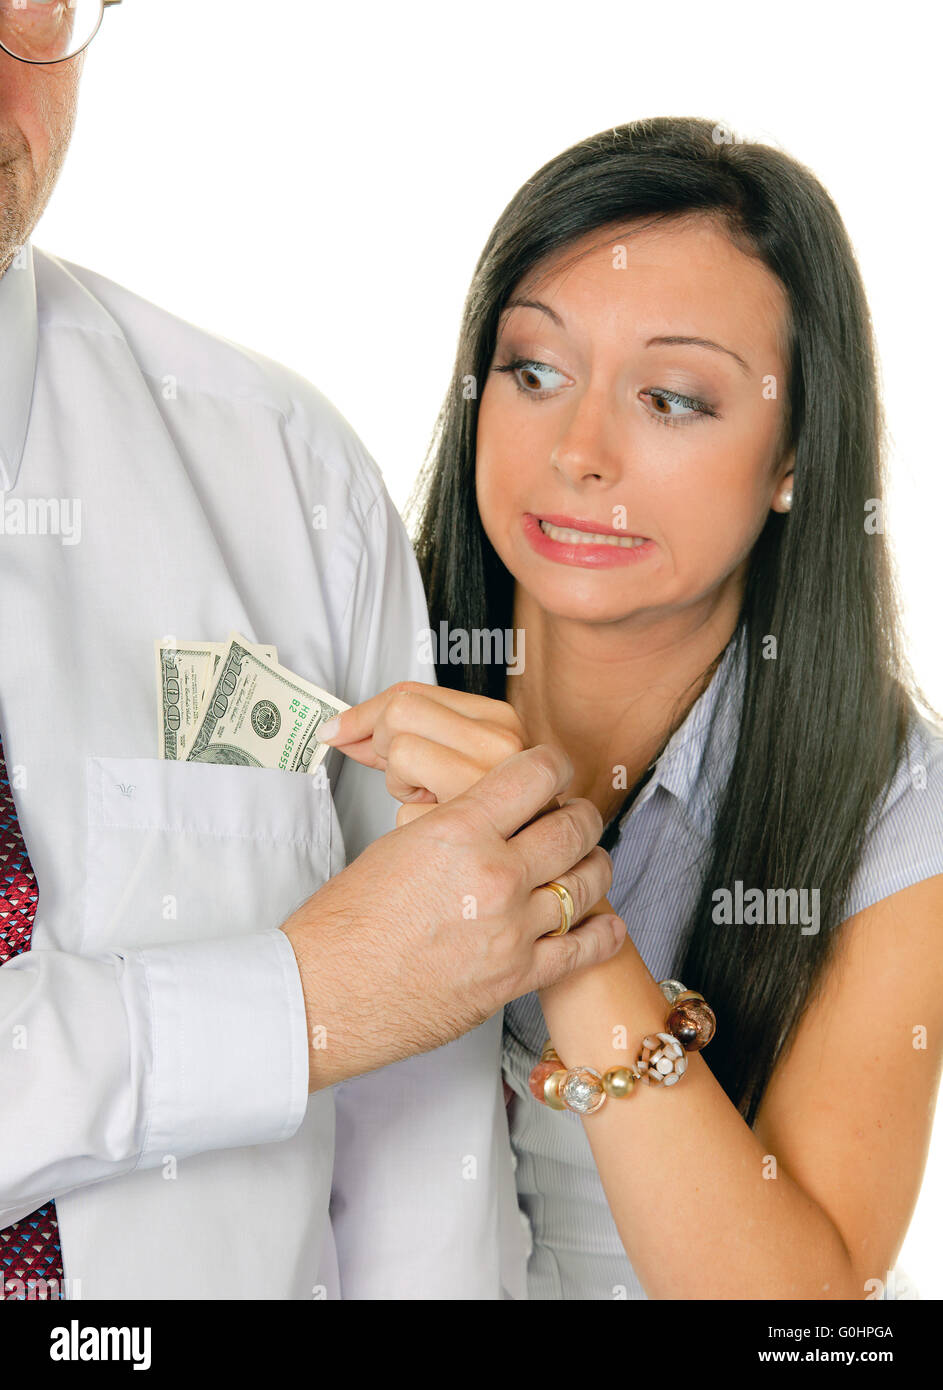 Woman pulls a man out of the money Tasche.Dollar Stock Photo